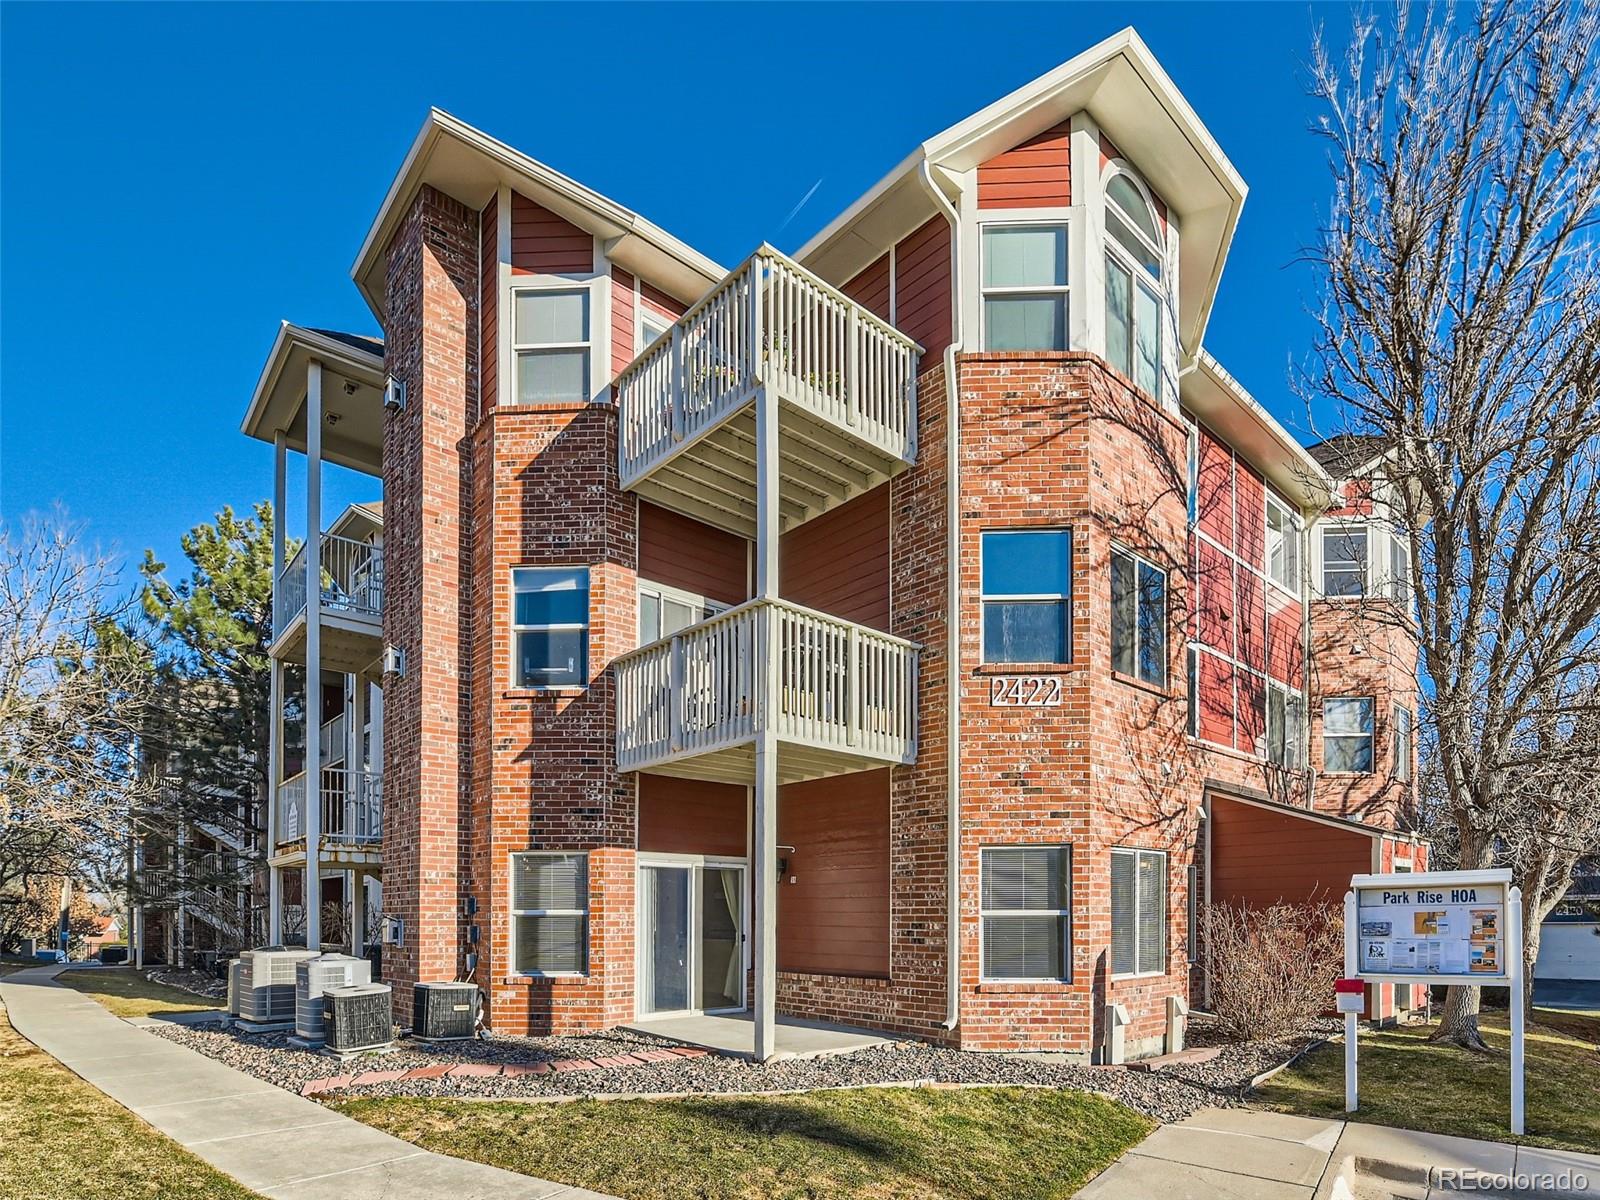 Report Image for 2422 W 82nd Place,Westminster, Colorado